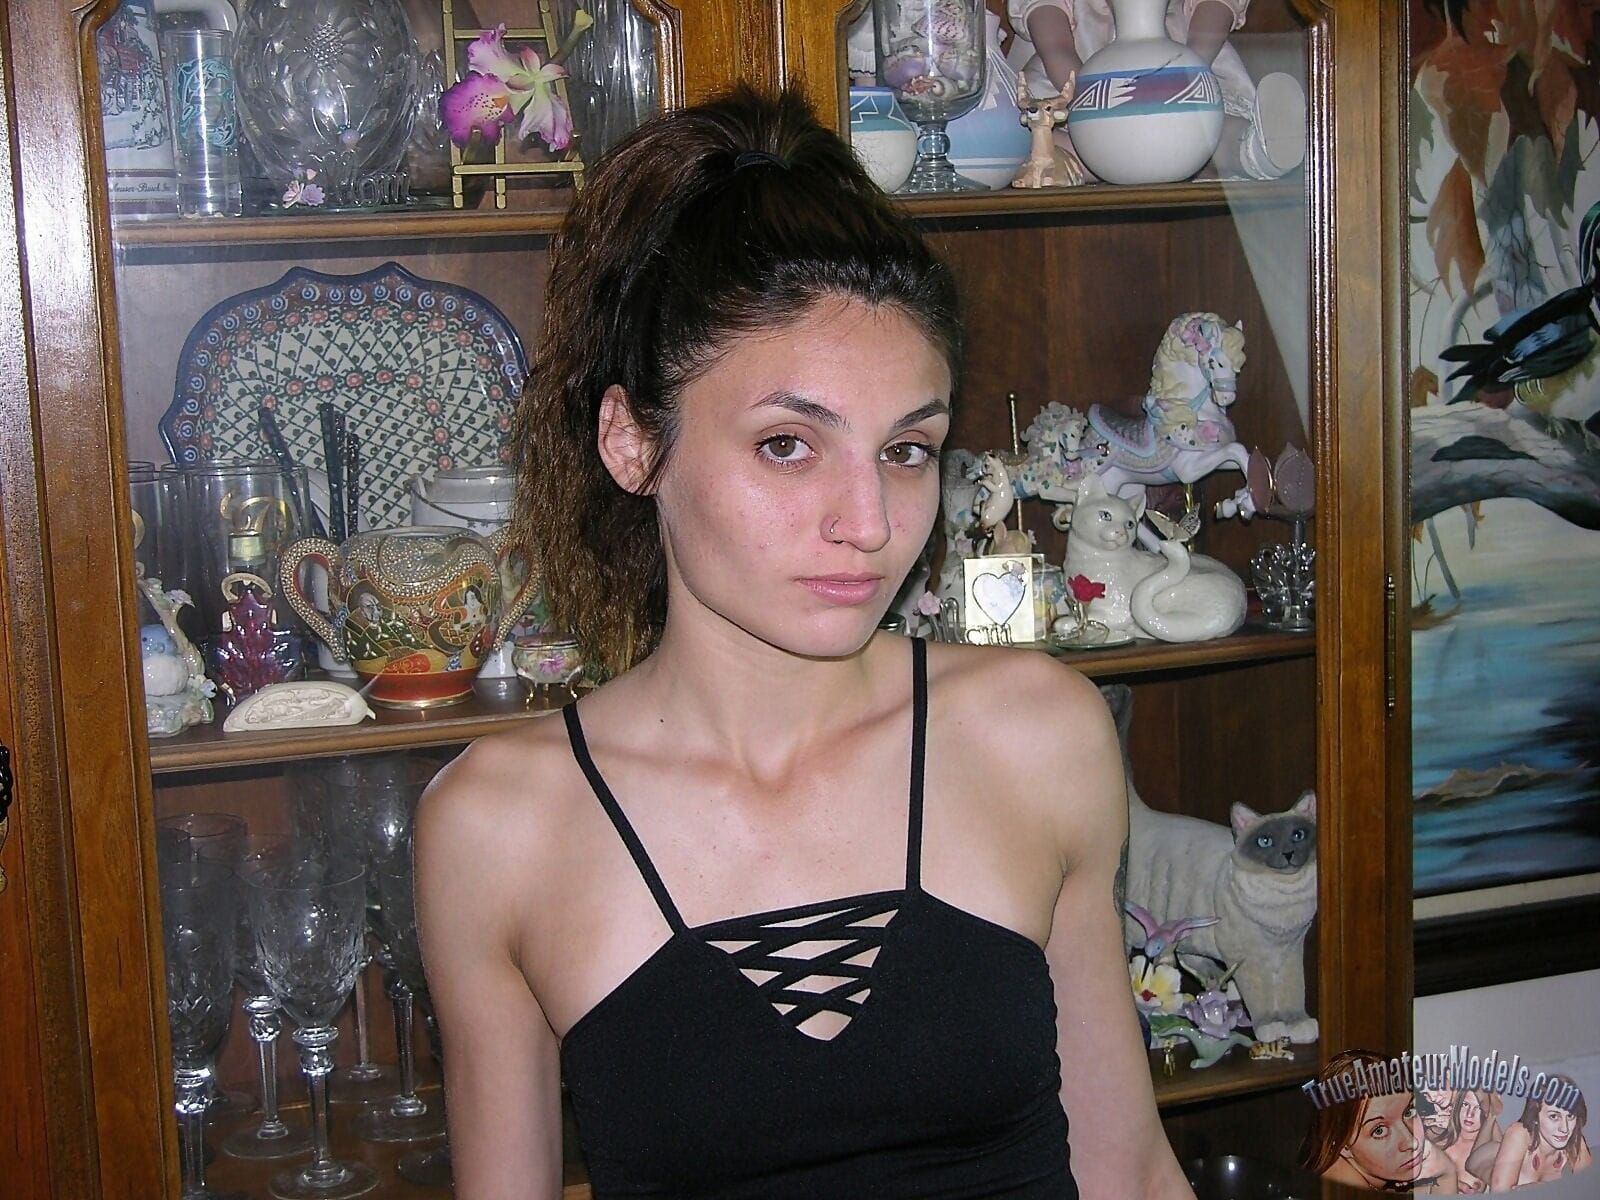 Amateur skinny italian girl modeling and spreading her pussy lip - part 1626 page 1